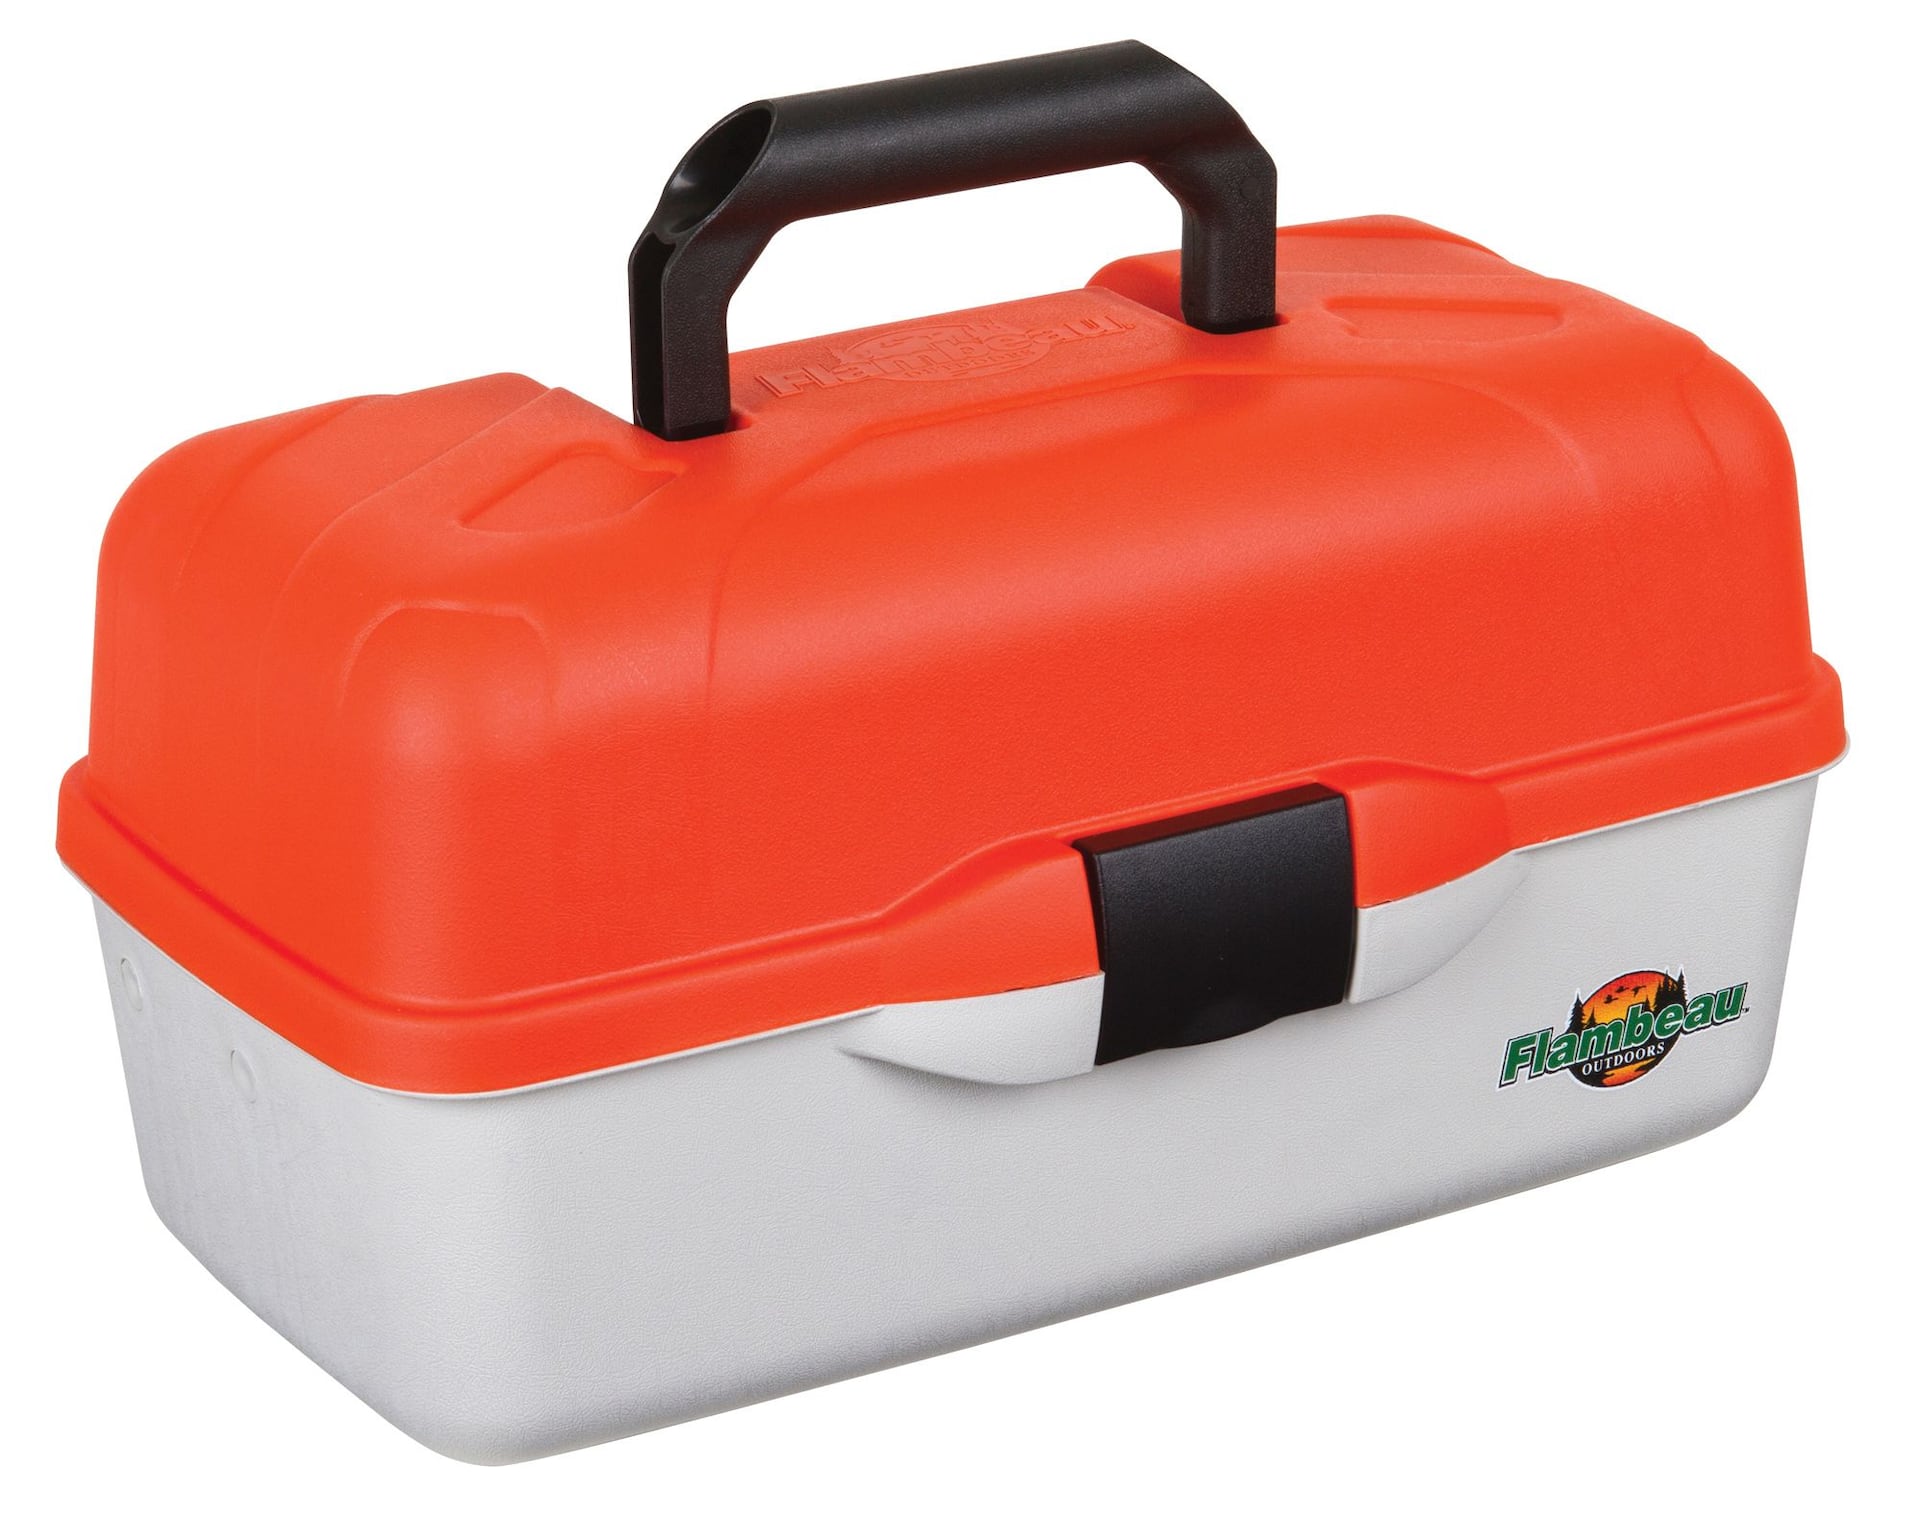 https://media-www.canadiantire.ca/product/playing/fishing/fishing-accessories/0782507/flambeau-3-tray-classic-tray-box-56d92a82-d8c8-4182-a473-61c470c25490-jpgrendition.jpg